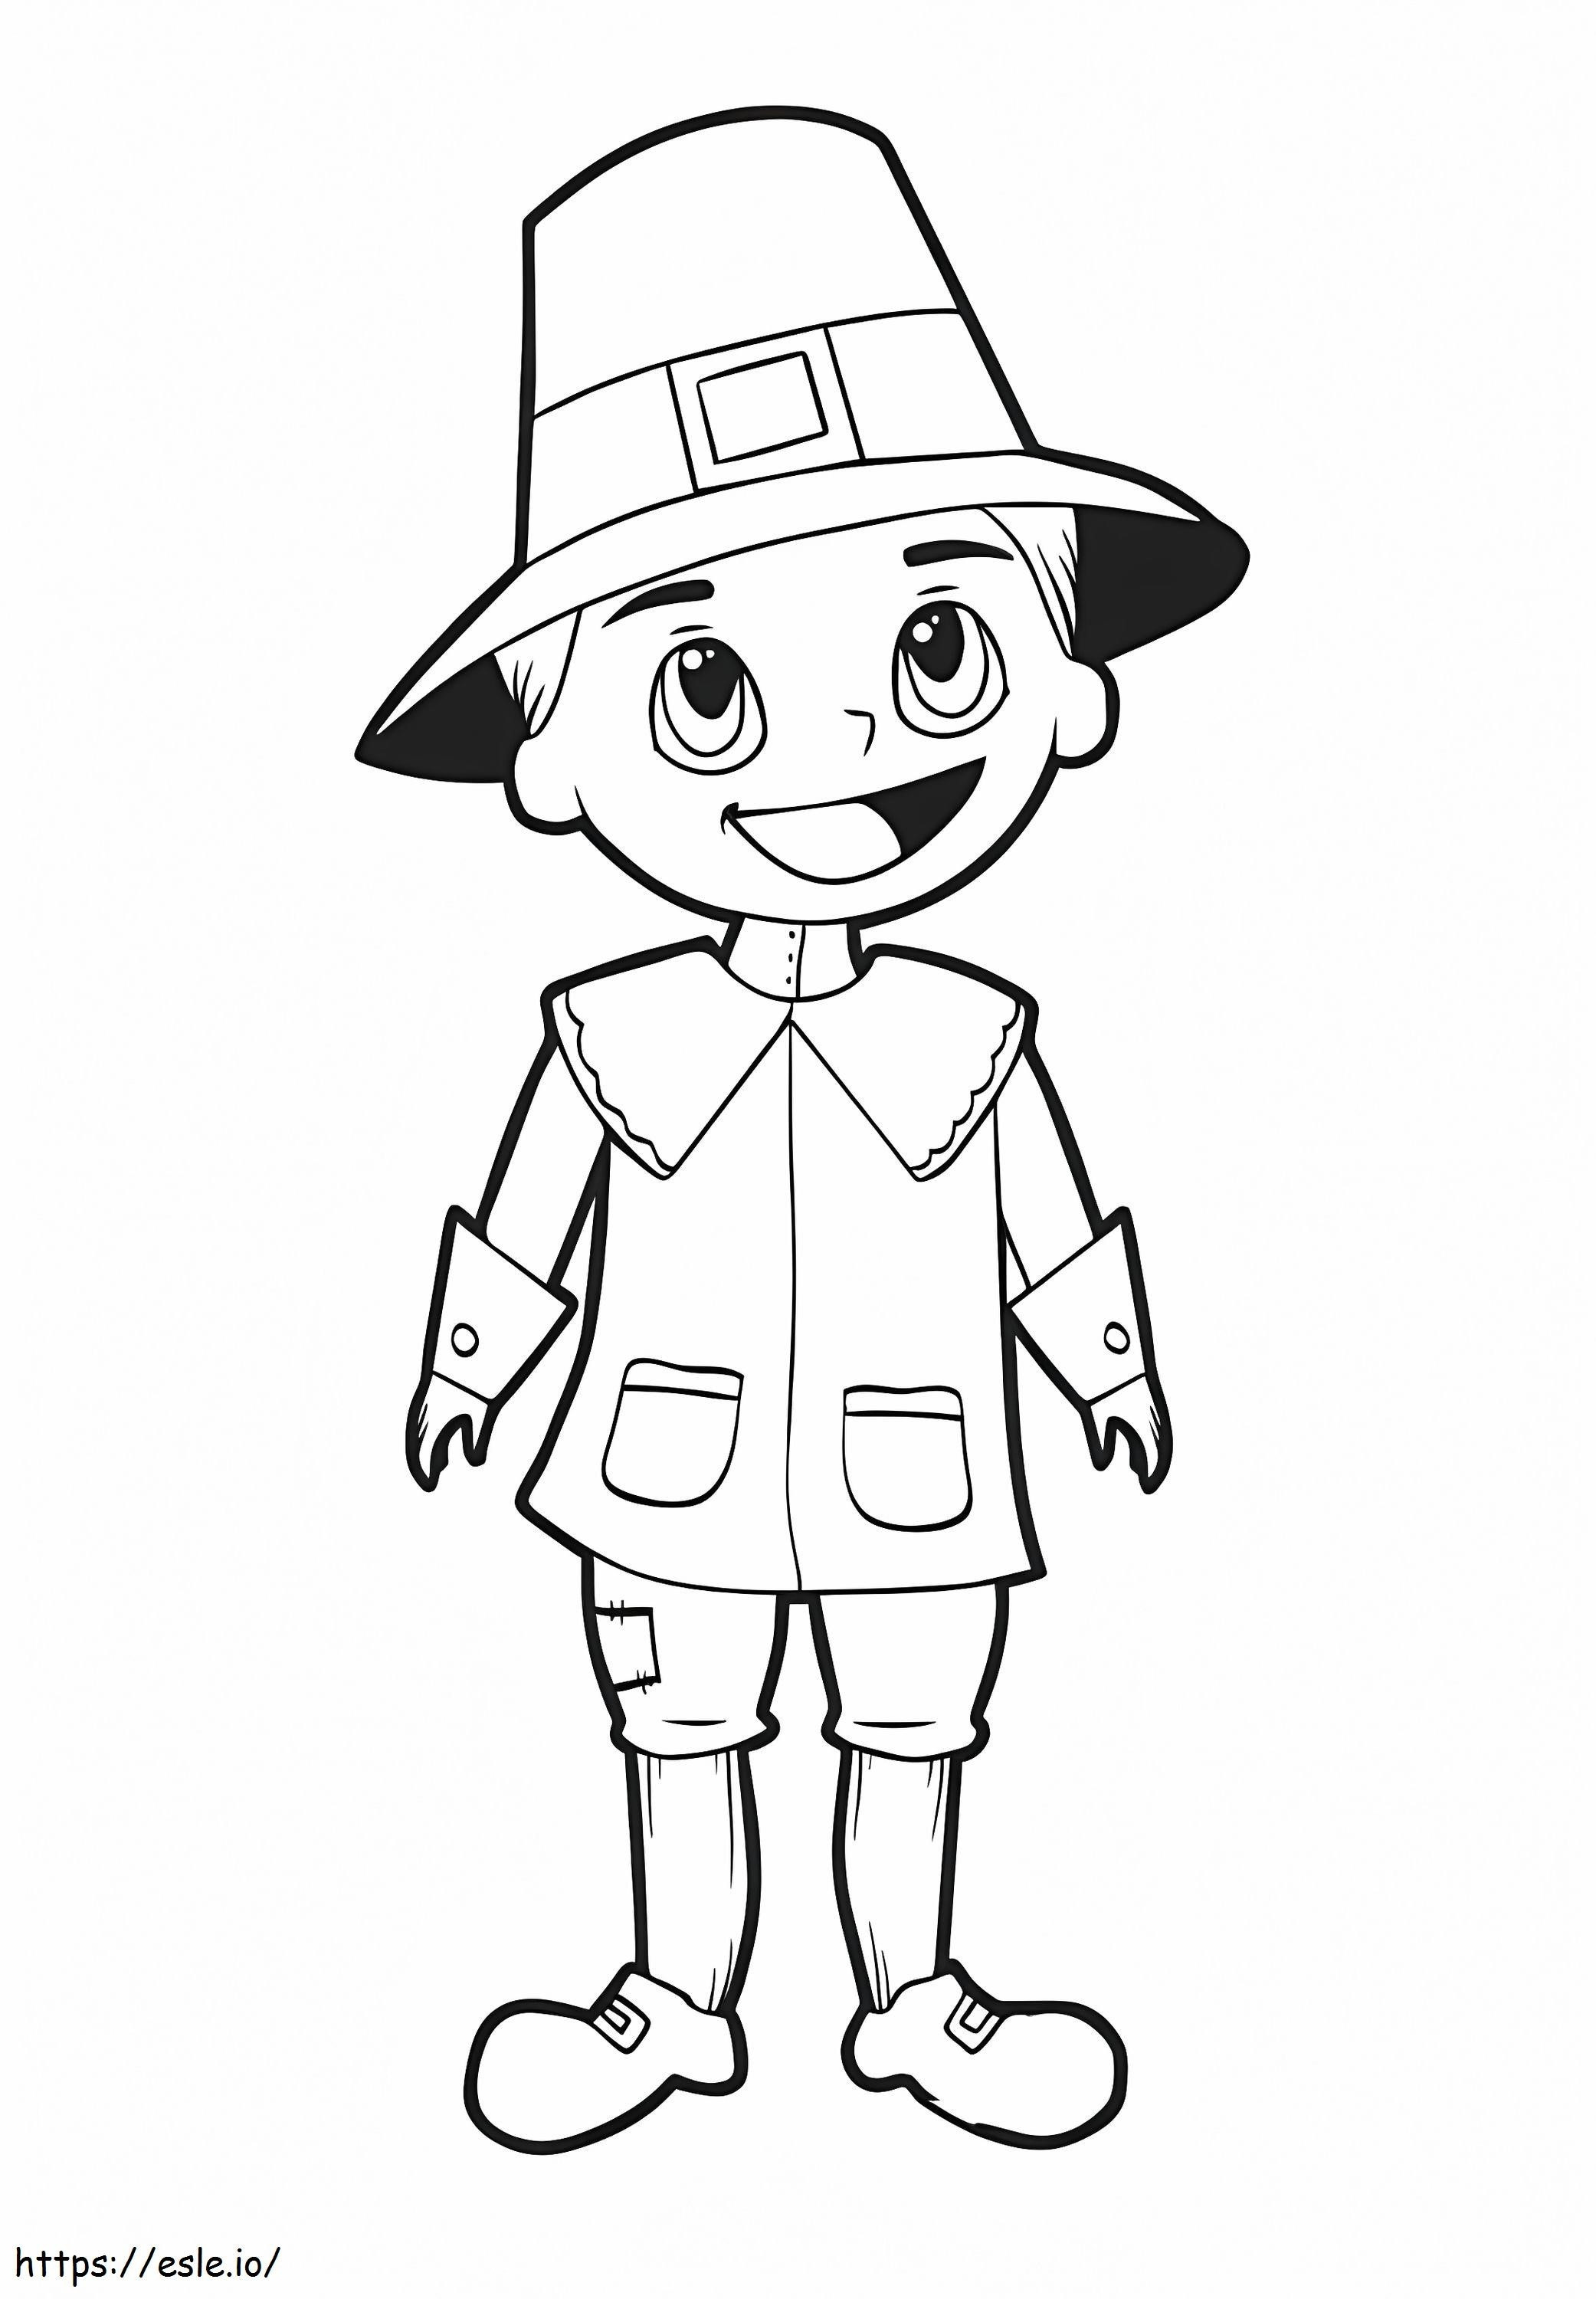 Young Pilgrim coloring page